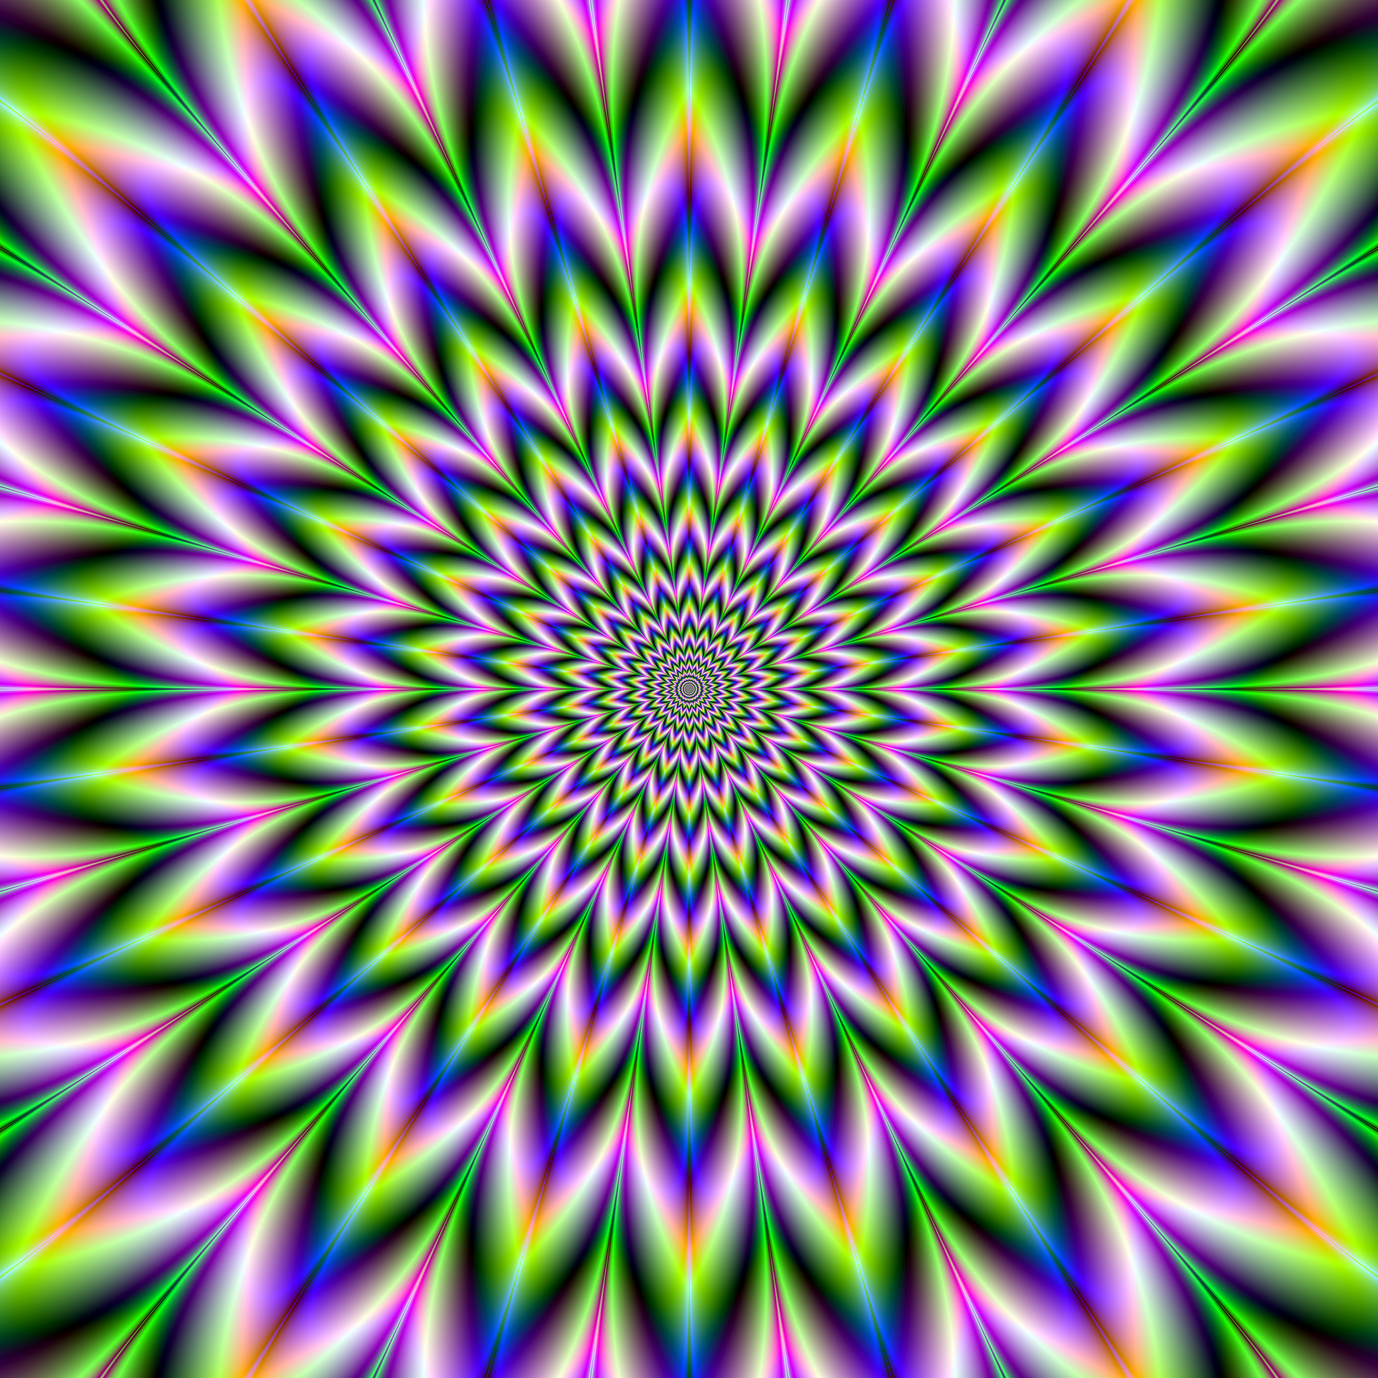 An Optical Illusion Trippy Poster